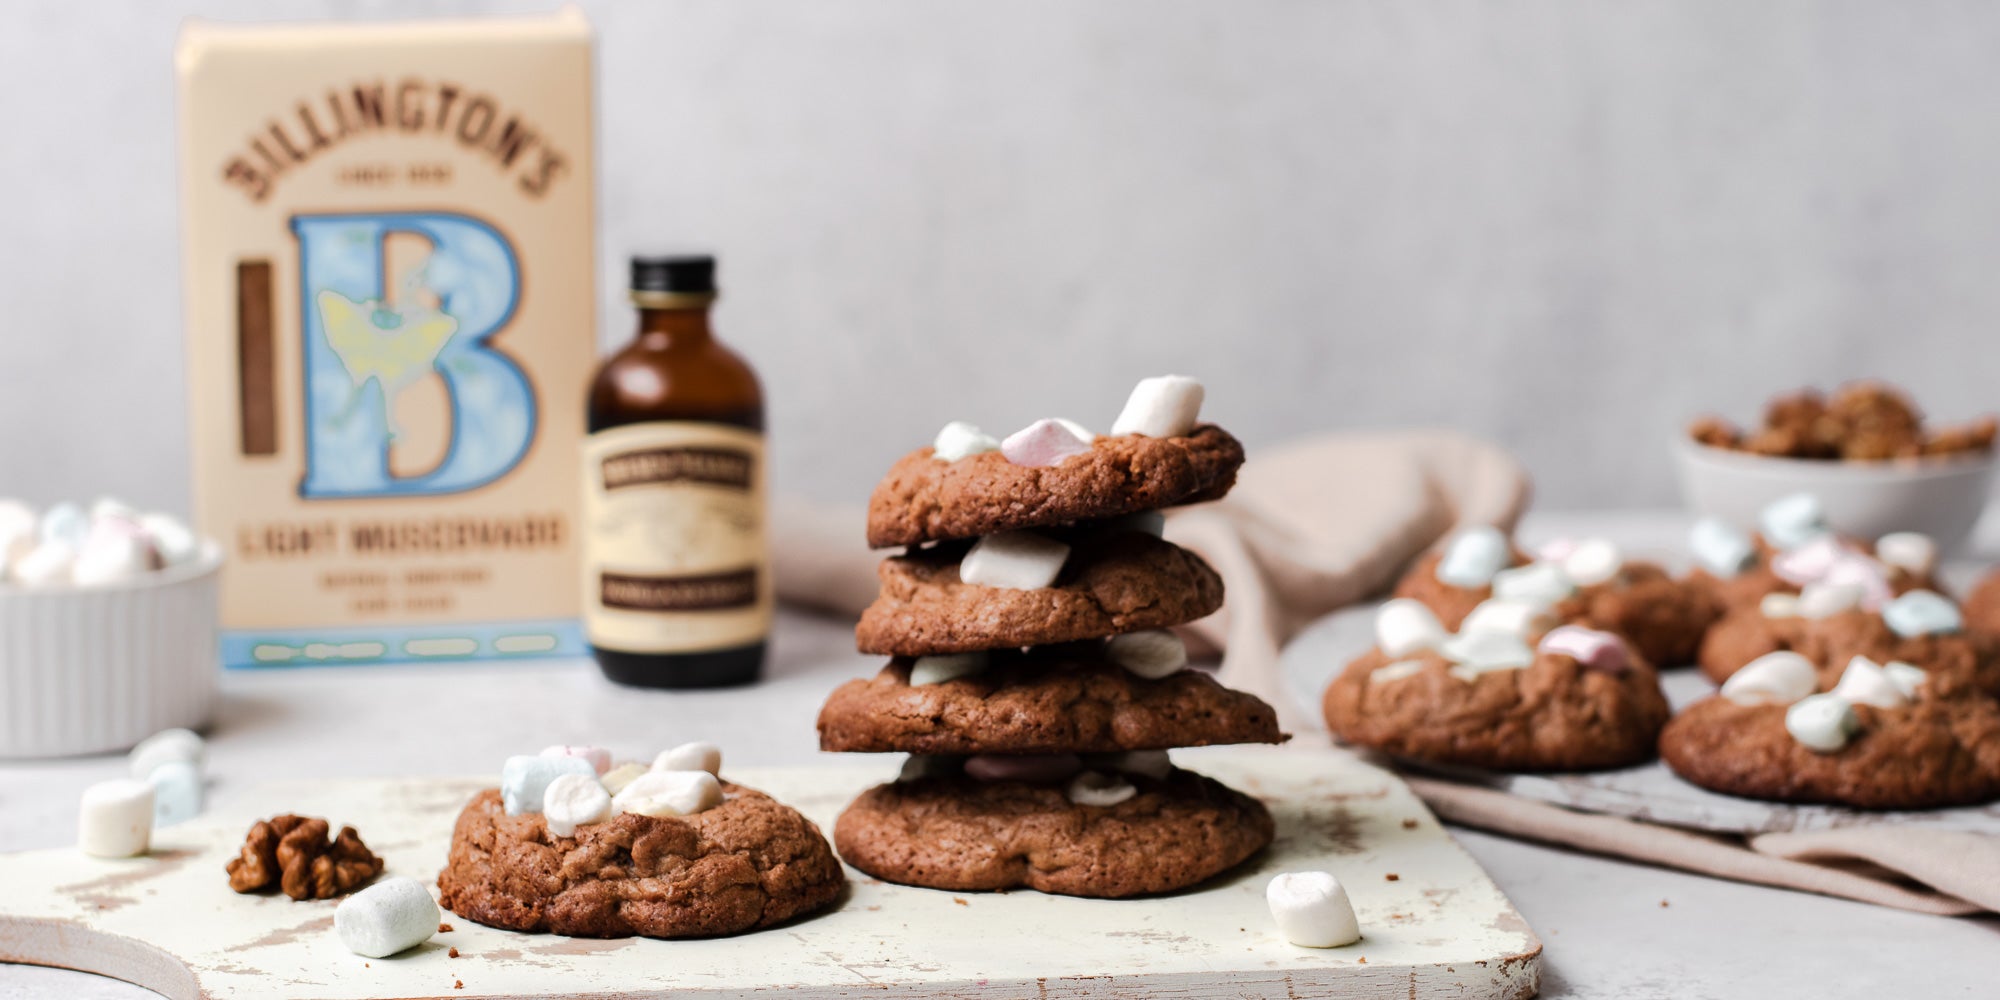 Rocky Road Cookies stacked on top of each other on a serving board, next to a bottle of Neilsen-Massey Vanilla extract, with a box of Billington's Light Muscovado sugar behind